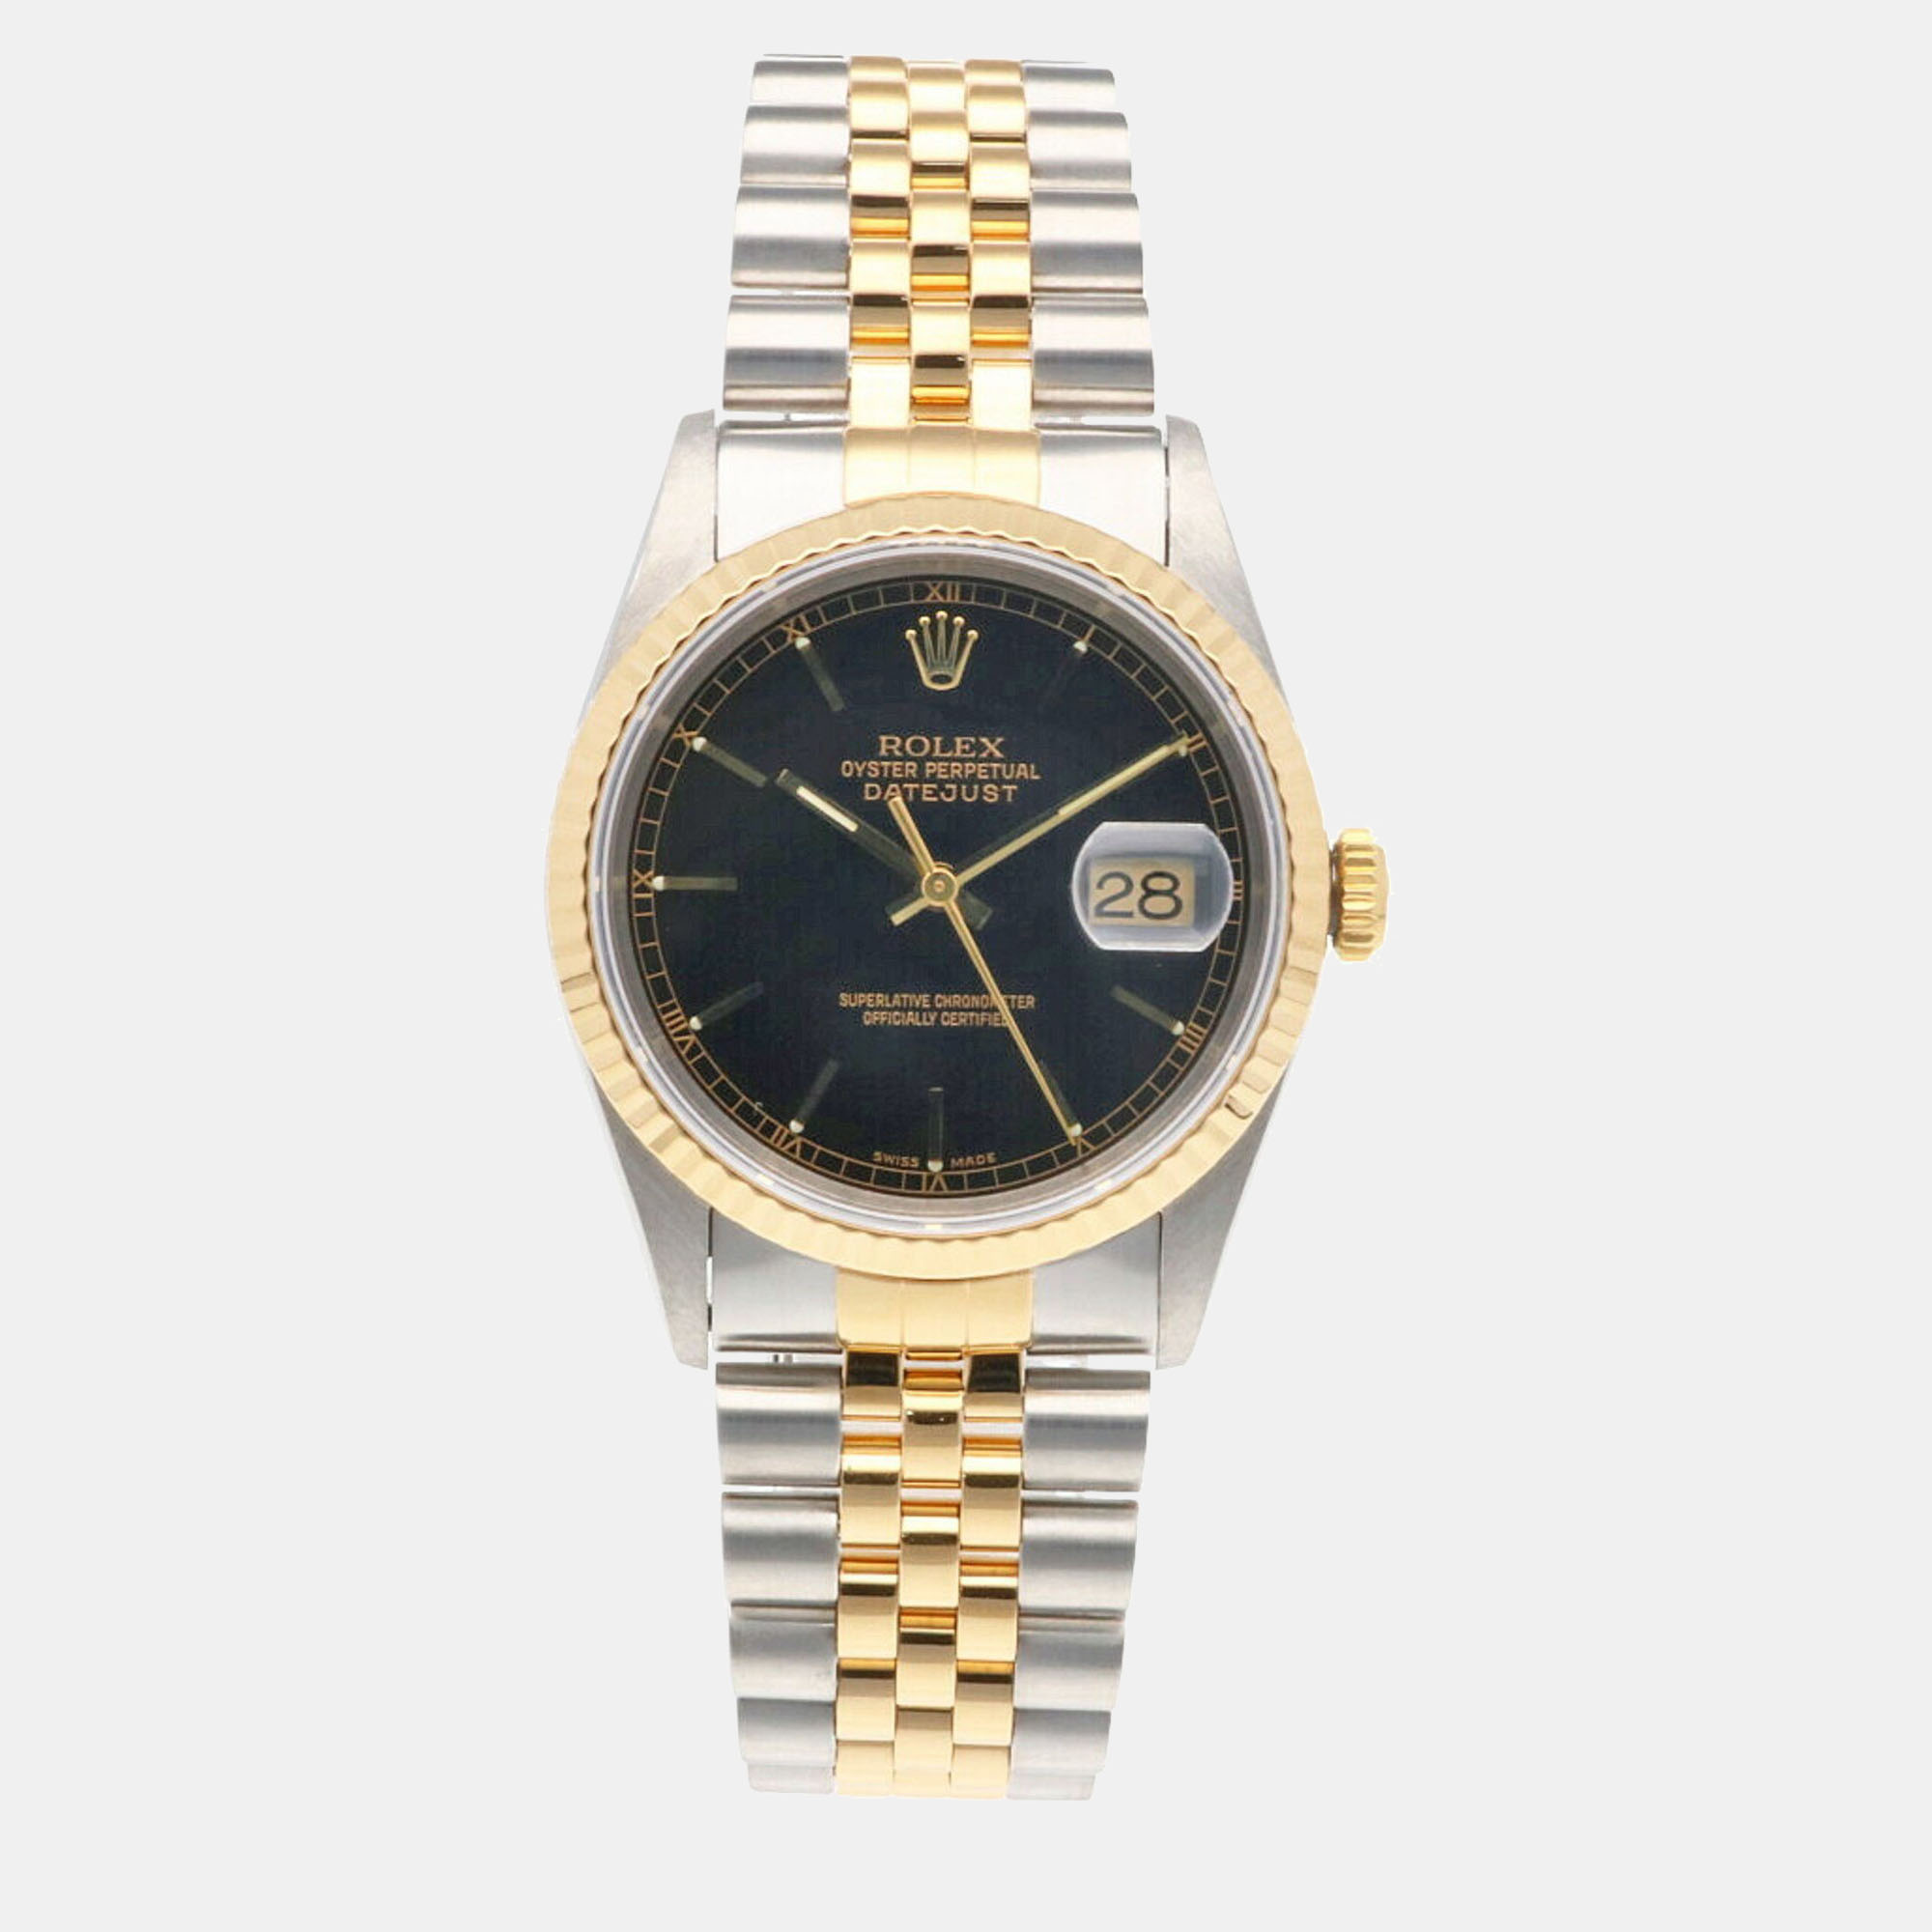 Rolex Black 18k Yellow Gold And Stainless Steel Datejust 16233 Automatic Men's Wristwatch 36 Mm